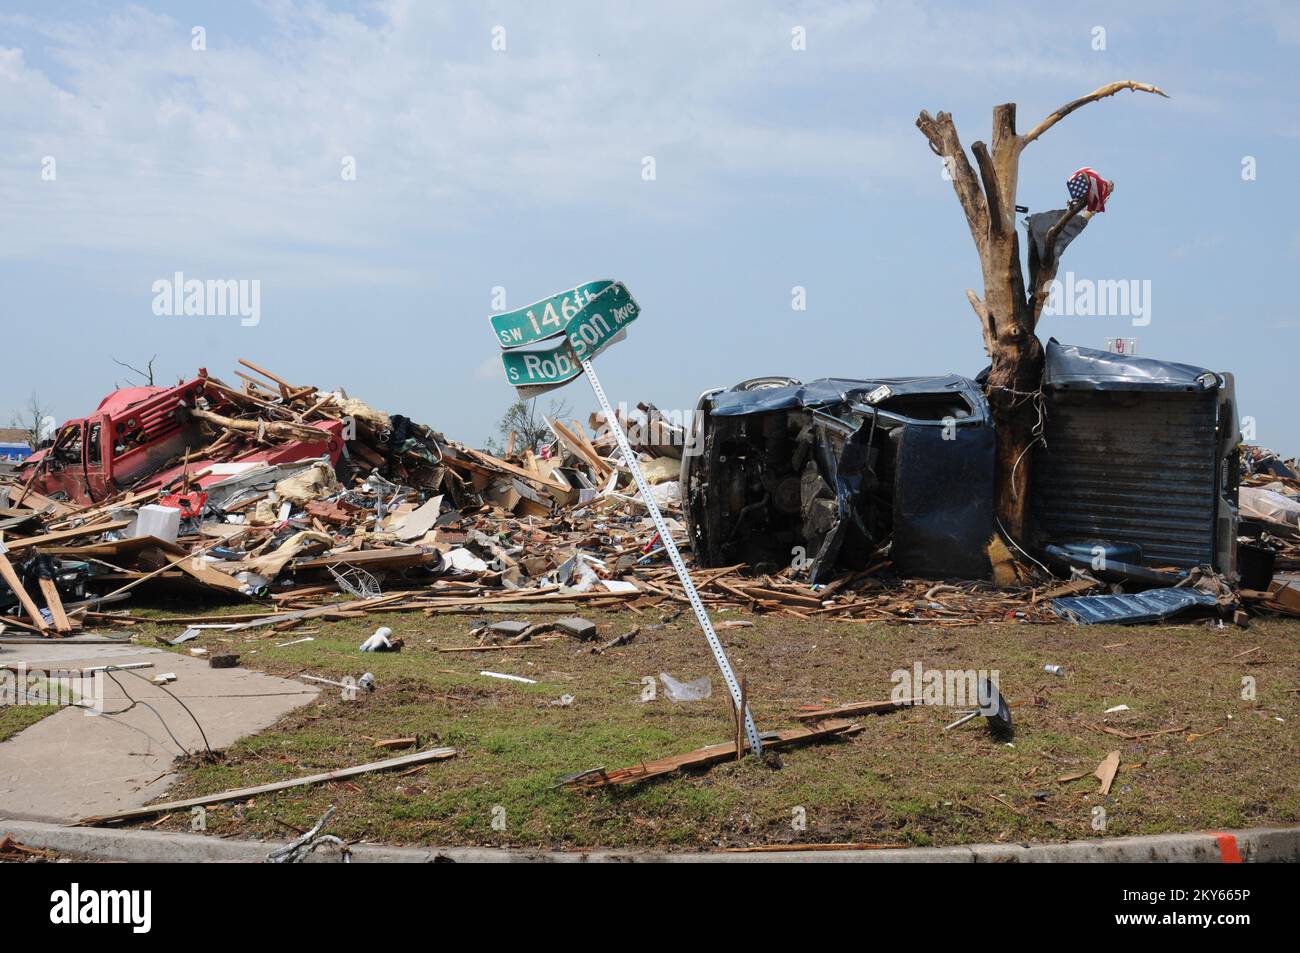 Wind Twists Truck Around Tree: Power of an EF-5.. Photographs Relating to Disasters and Emergency Management Programs, Activities, and Officials Stock Photo